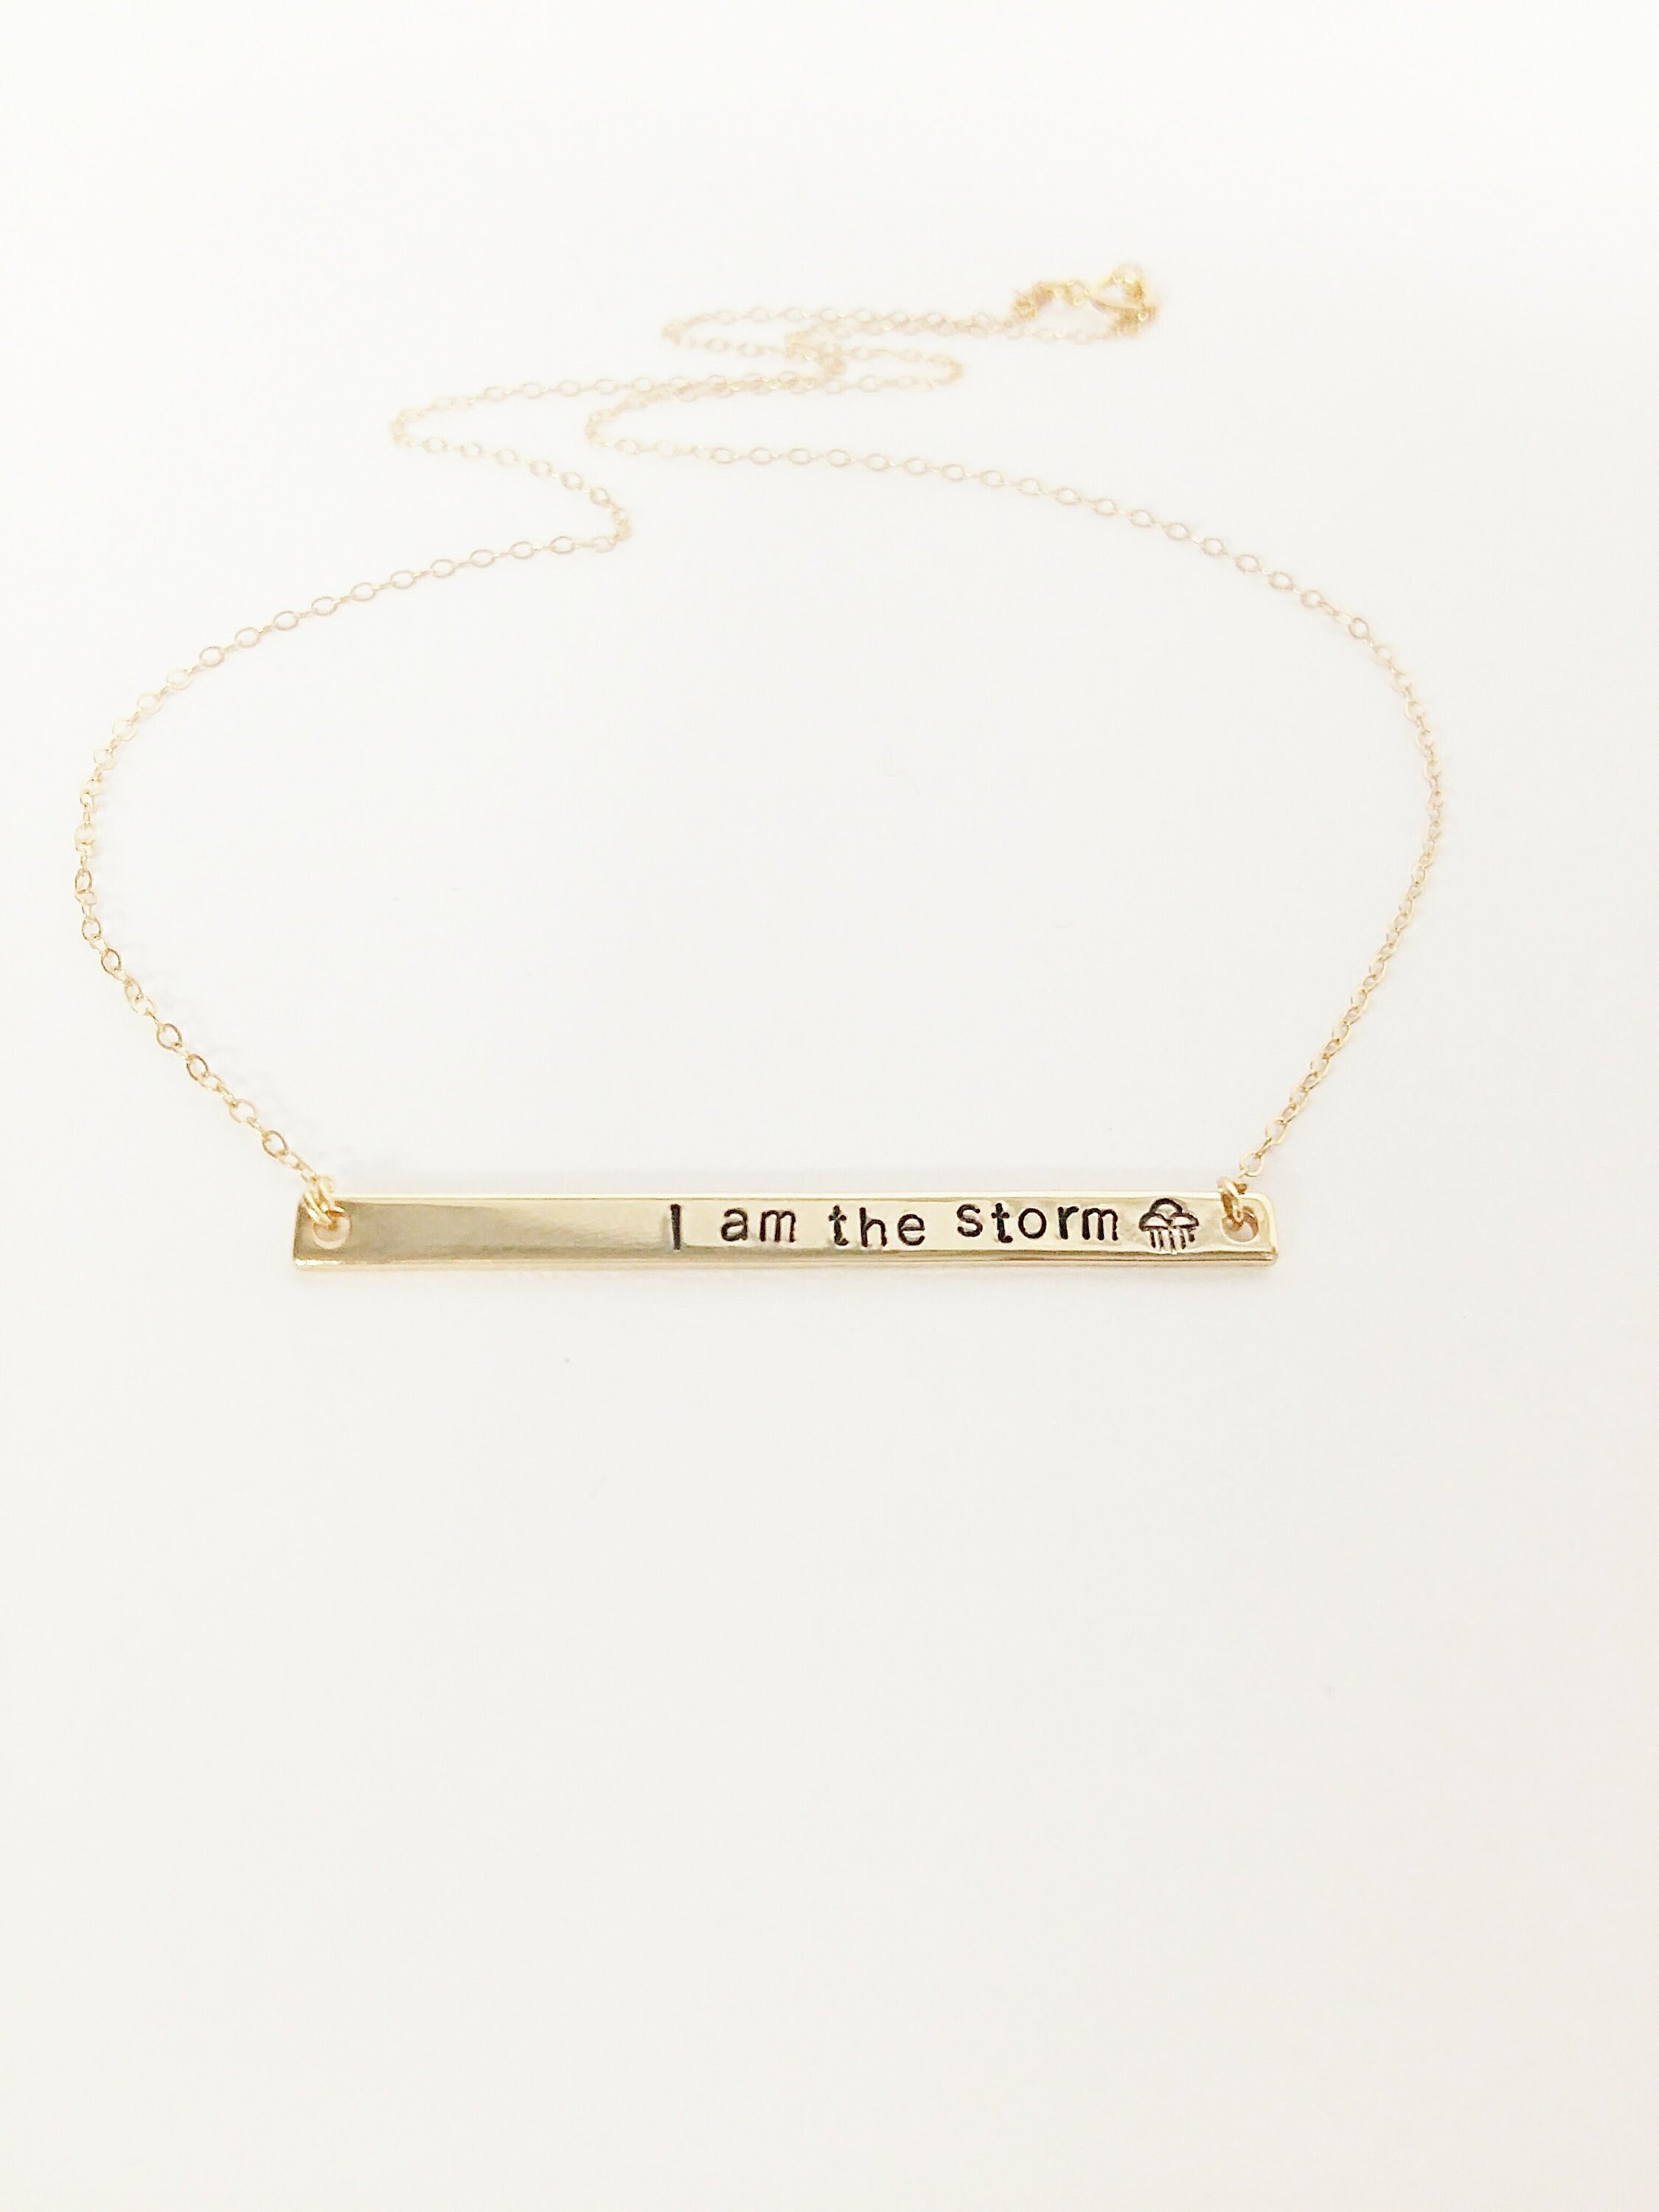 I AM THE STORM Bar Necklace // Gold or Silver Necklace // - Etsy Polska